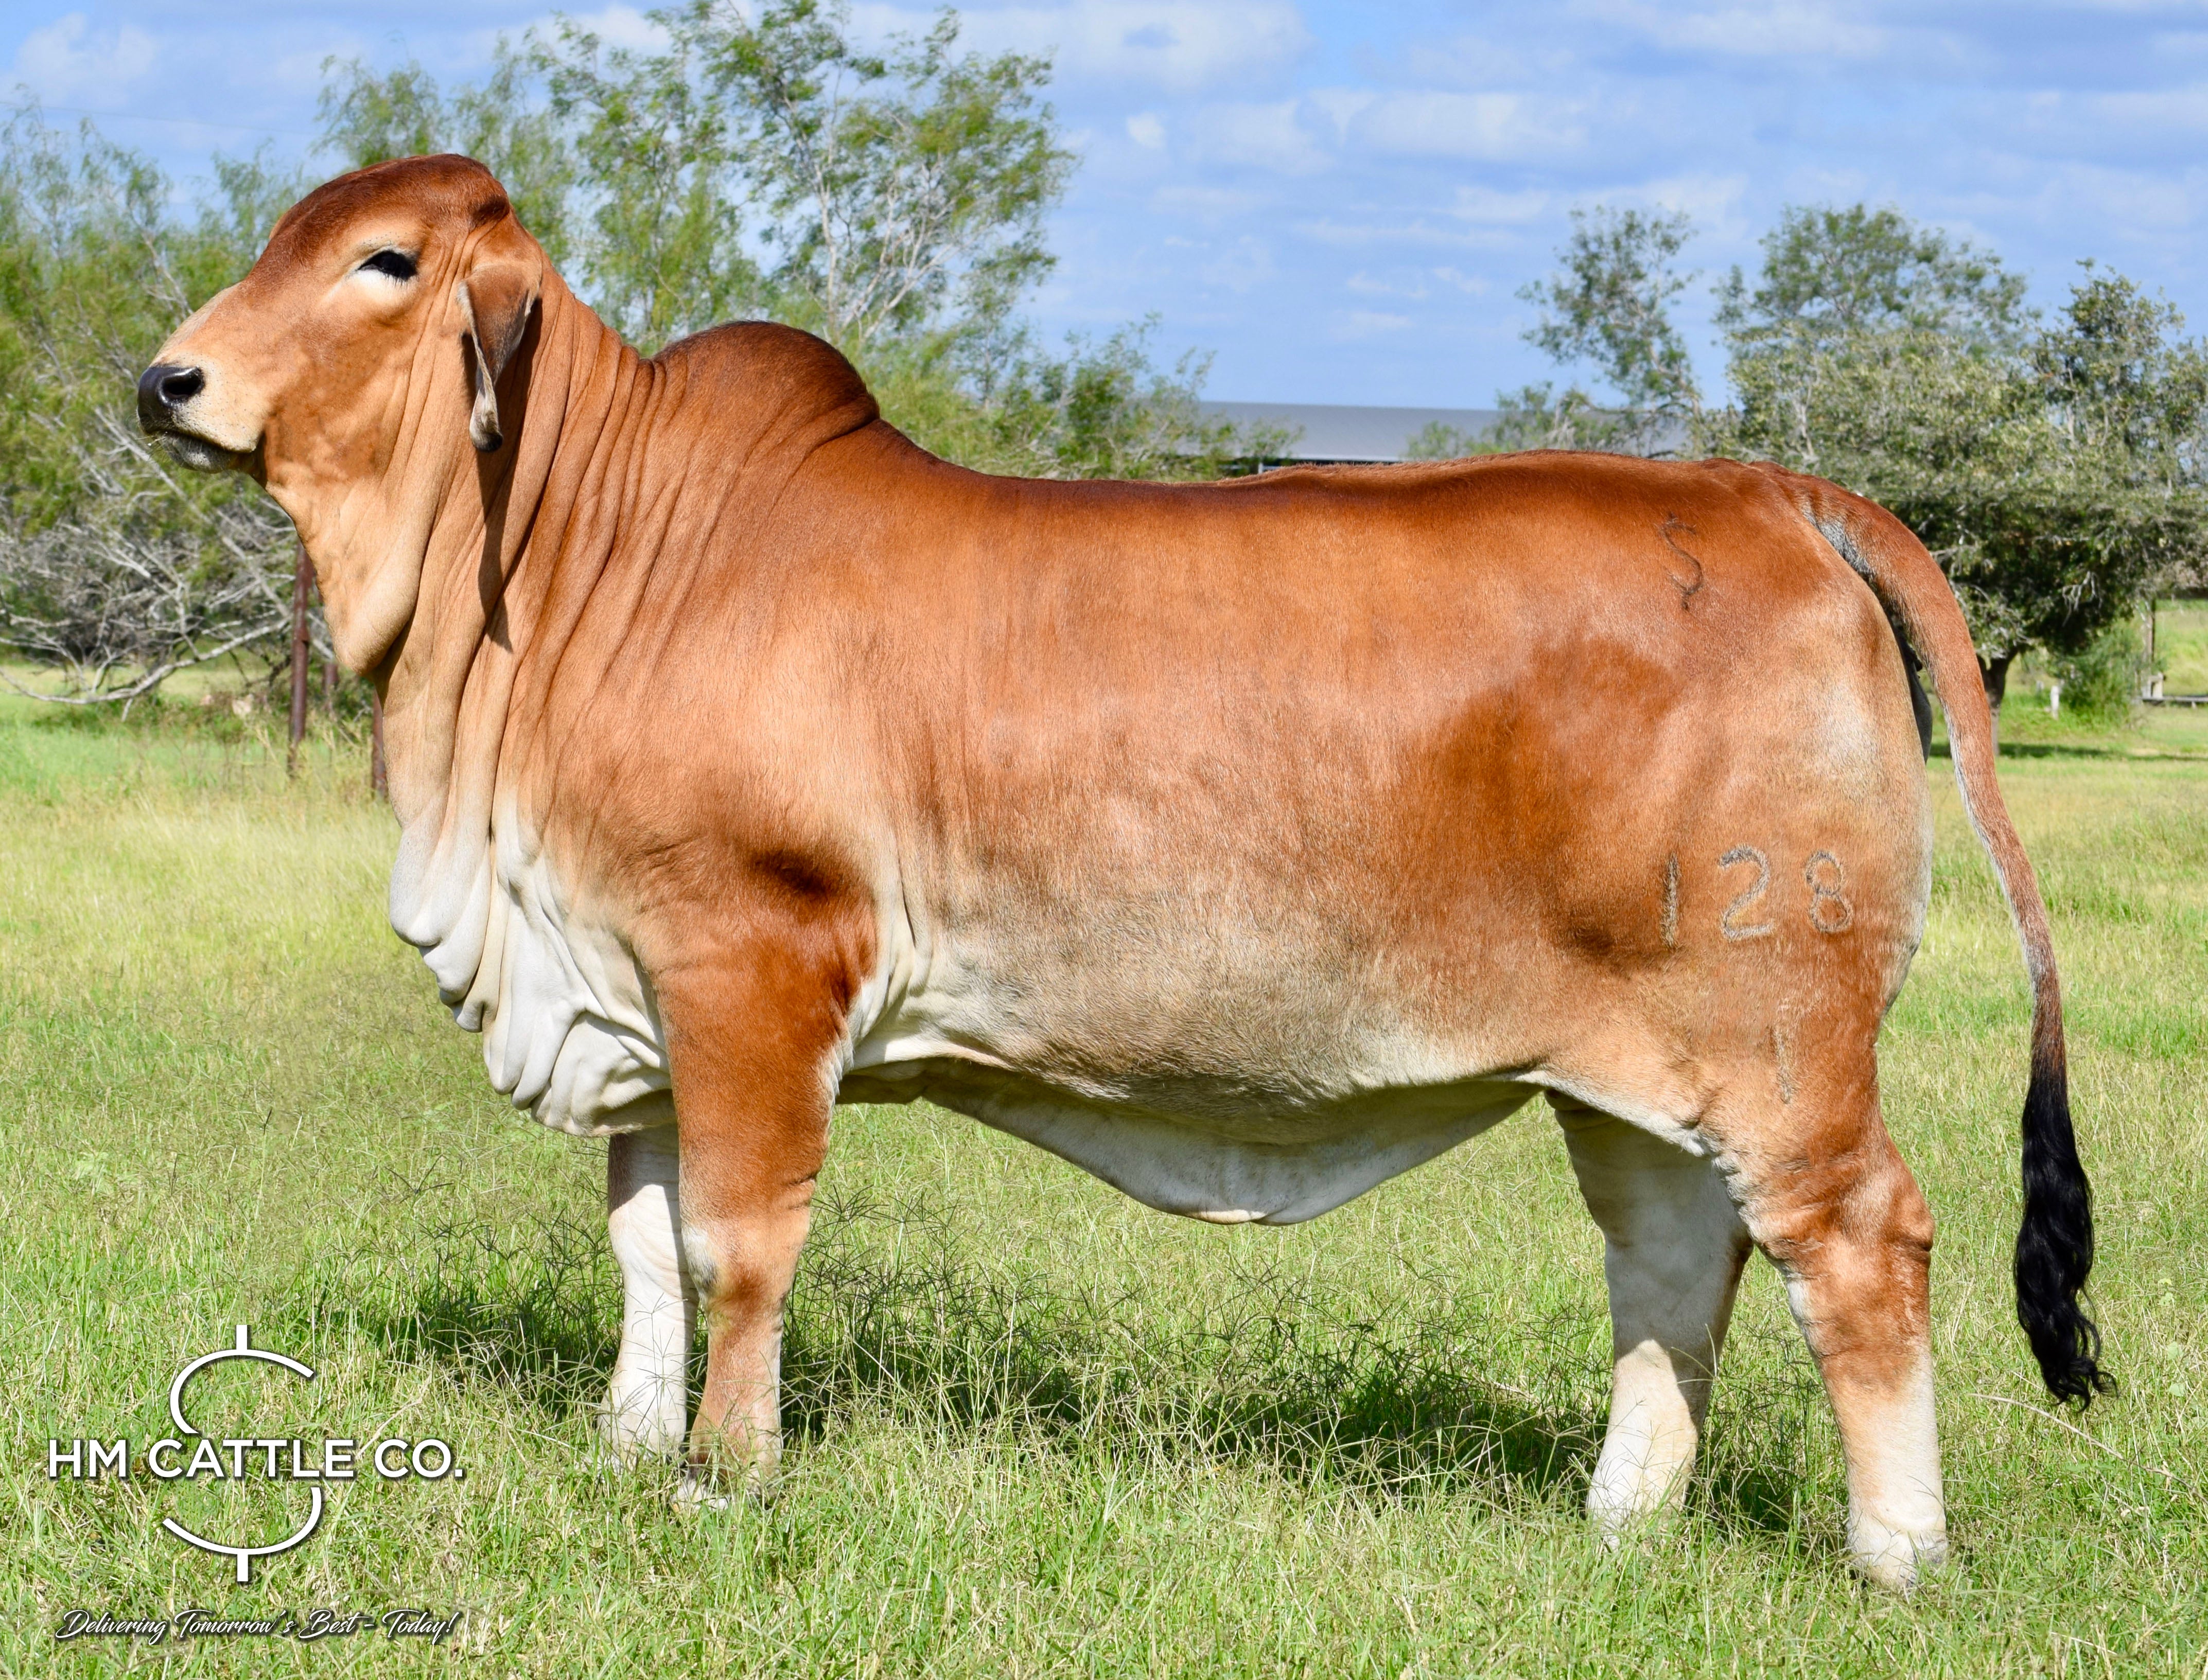 Package of 3 Sexed Female Embryos - Mr. V8 279/7 (P) x Miss HMC Polled 56/1 (P)